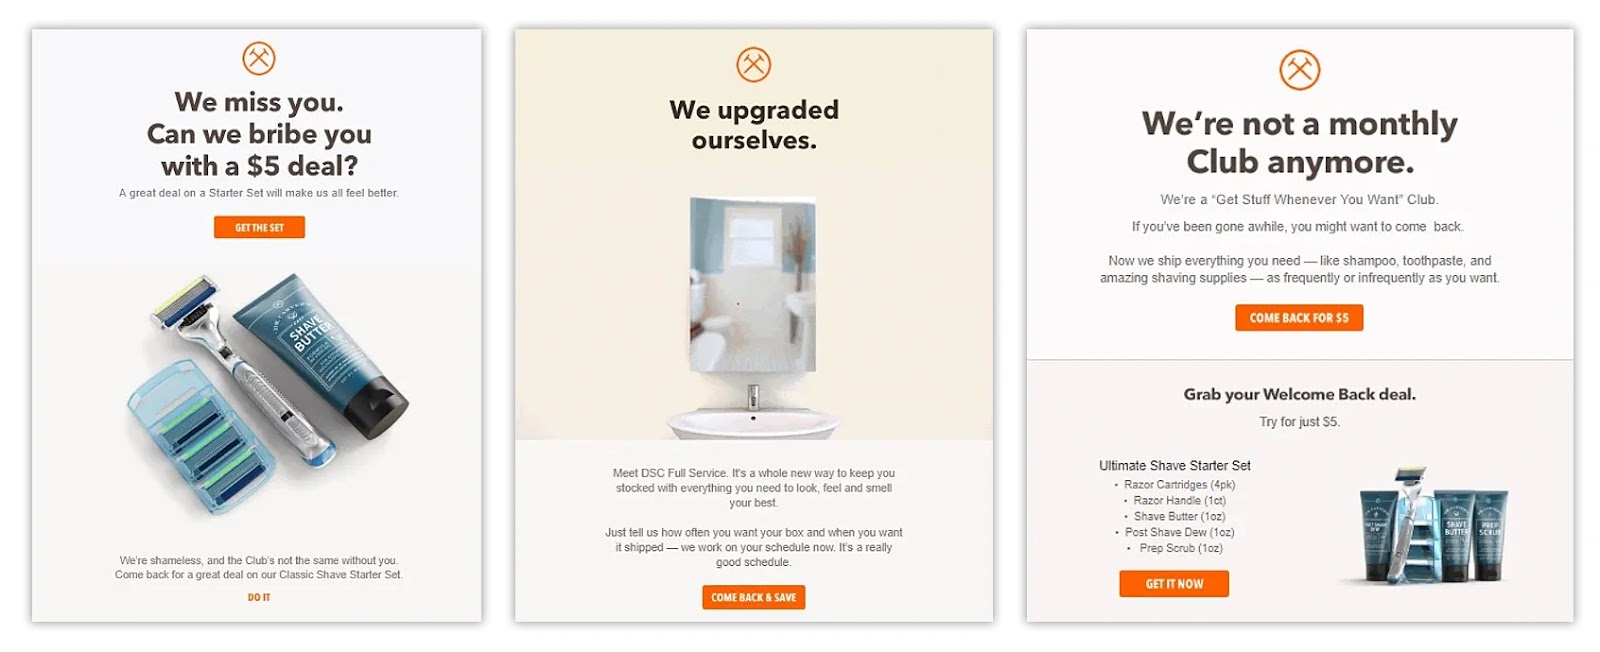 Dollar Shave Club's email sequence for the past customers